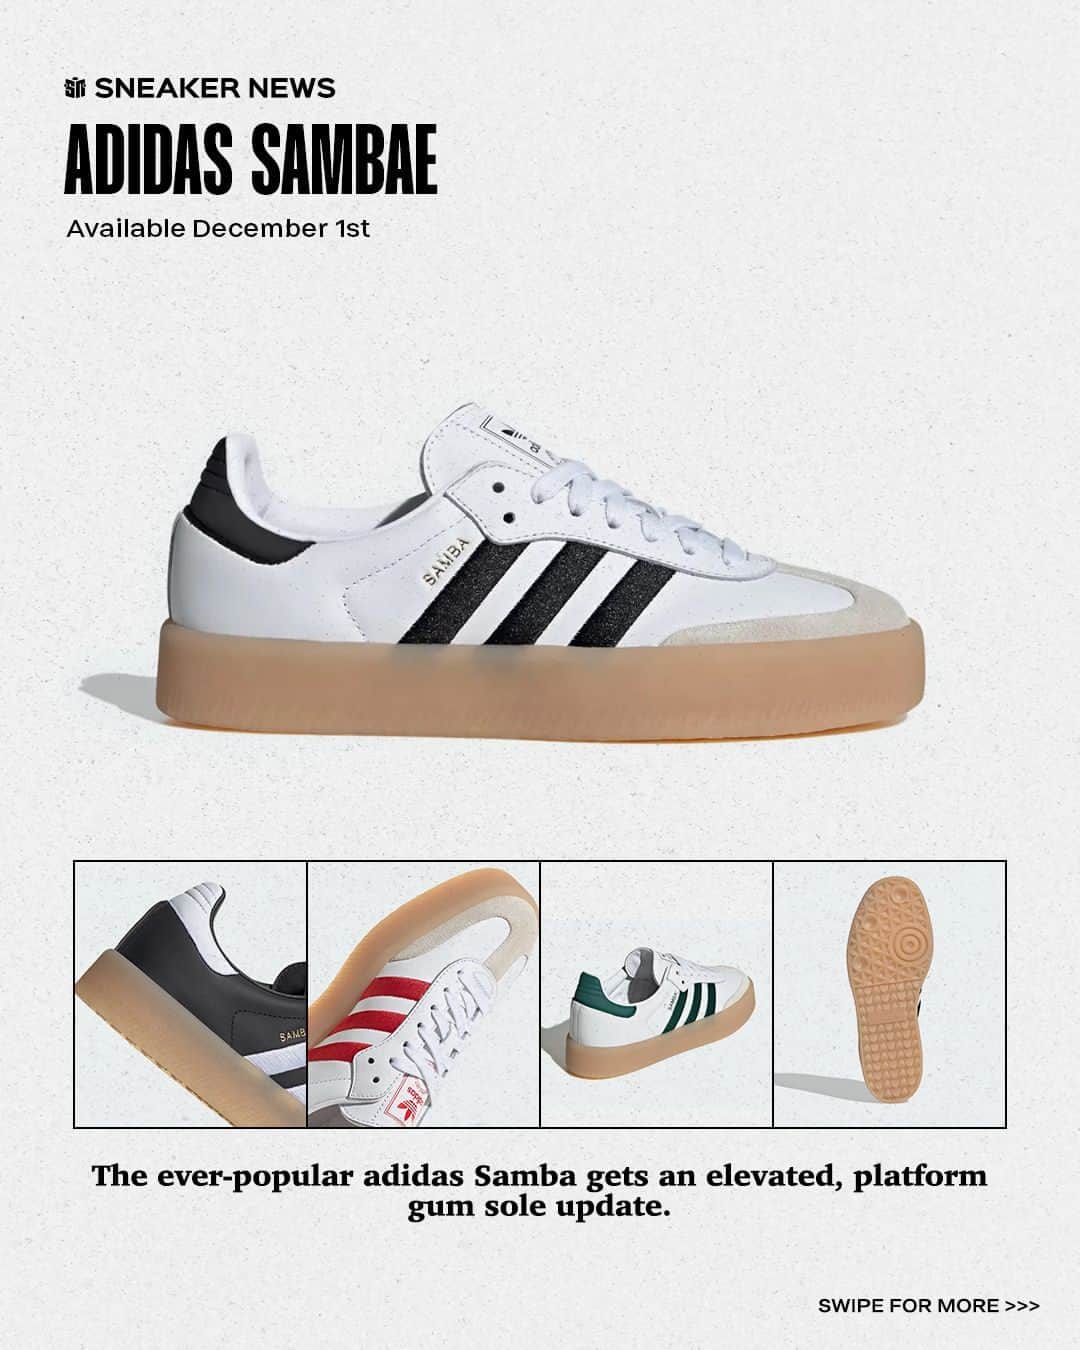 Sneaker Newsのインスタグラム：「@adidasoriginals gives its popular Samba a premium, elevated update ahead of the holidays. ⁠ ⁠ While instantly familiar, the adidas Sambae (not a typo) features a semi-translucent, platform gum sole. The new tooling presents the vintage performance model in a new, more fashion-forward light. Launch colorways keep things simple, but the Sambae could see some wacky makeovers throughout its lifecycle. ⁠ ⁠ Hit the LINK IN BIO for full details.」